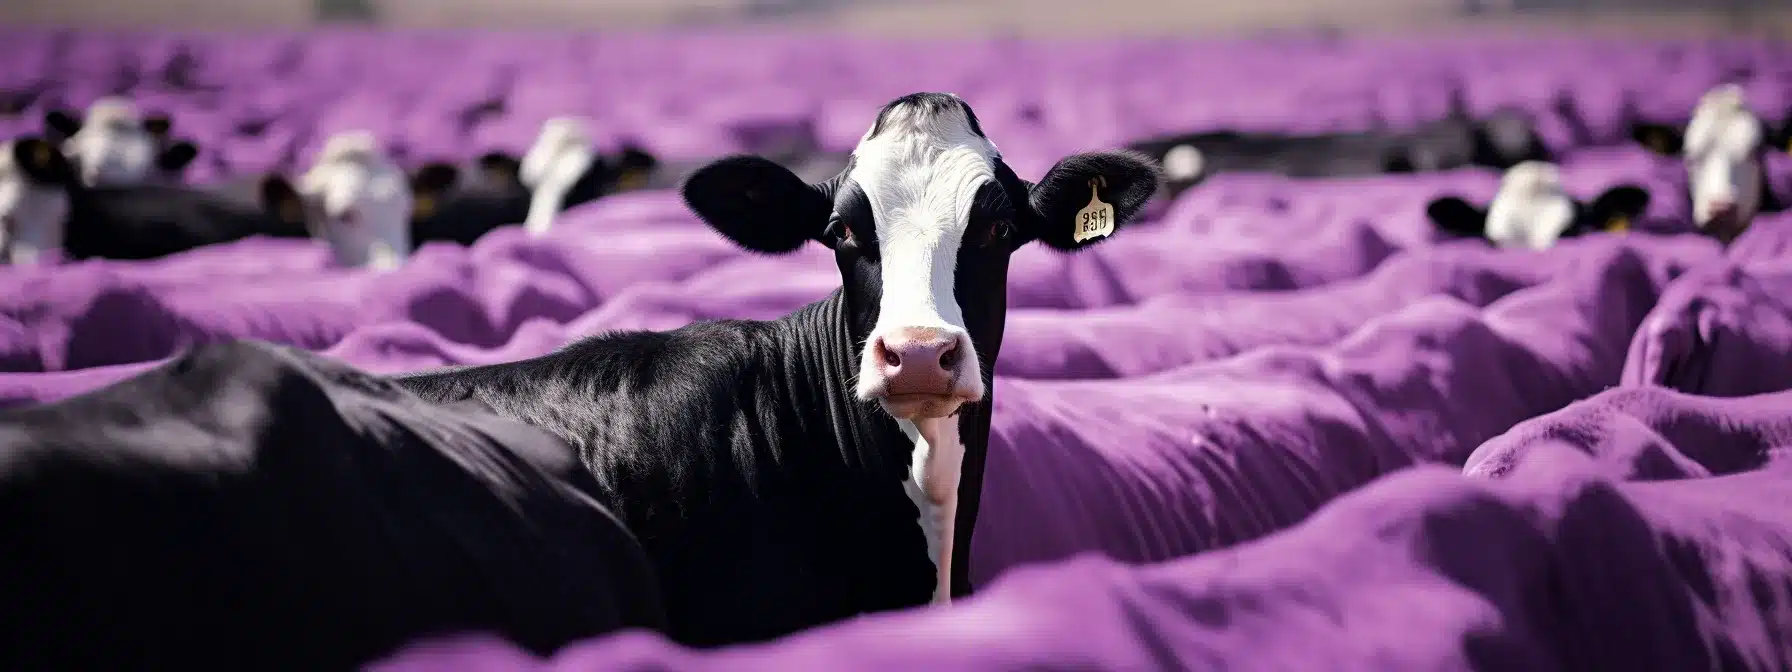 A Vibrant Purple Cow Standing Out Among A Sea Of Plain Black And White Cows.